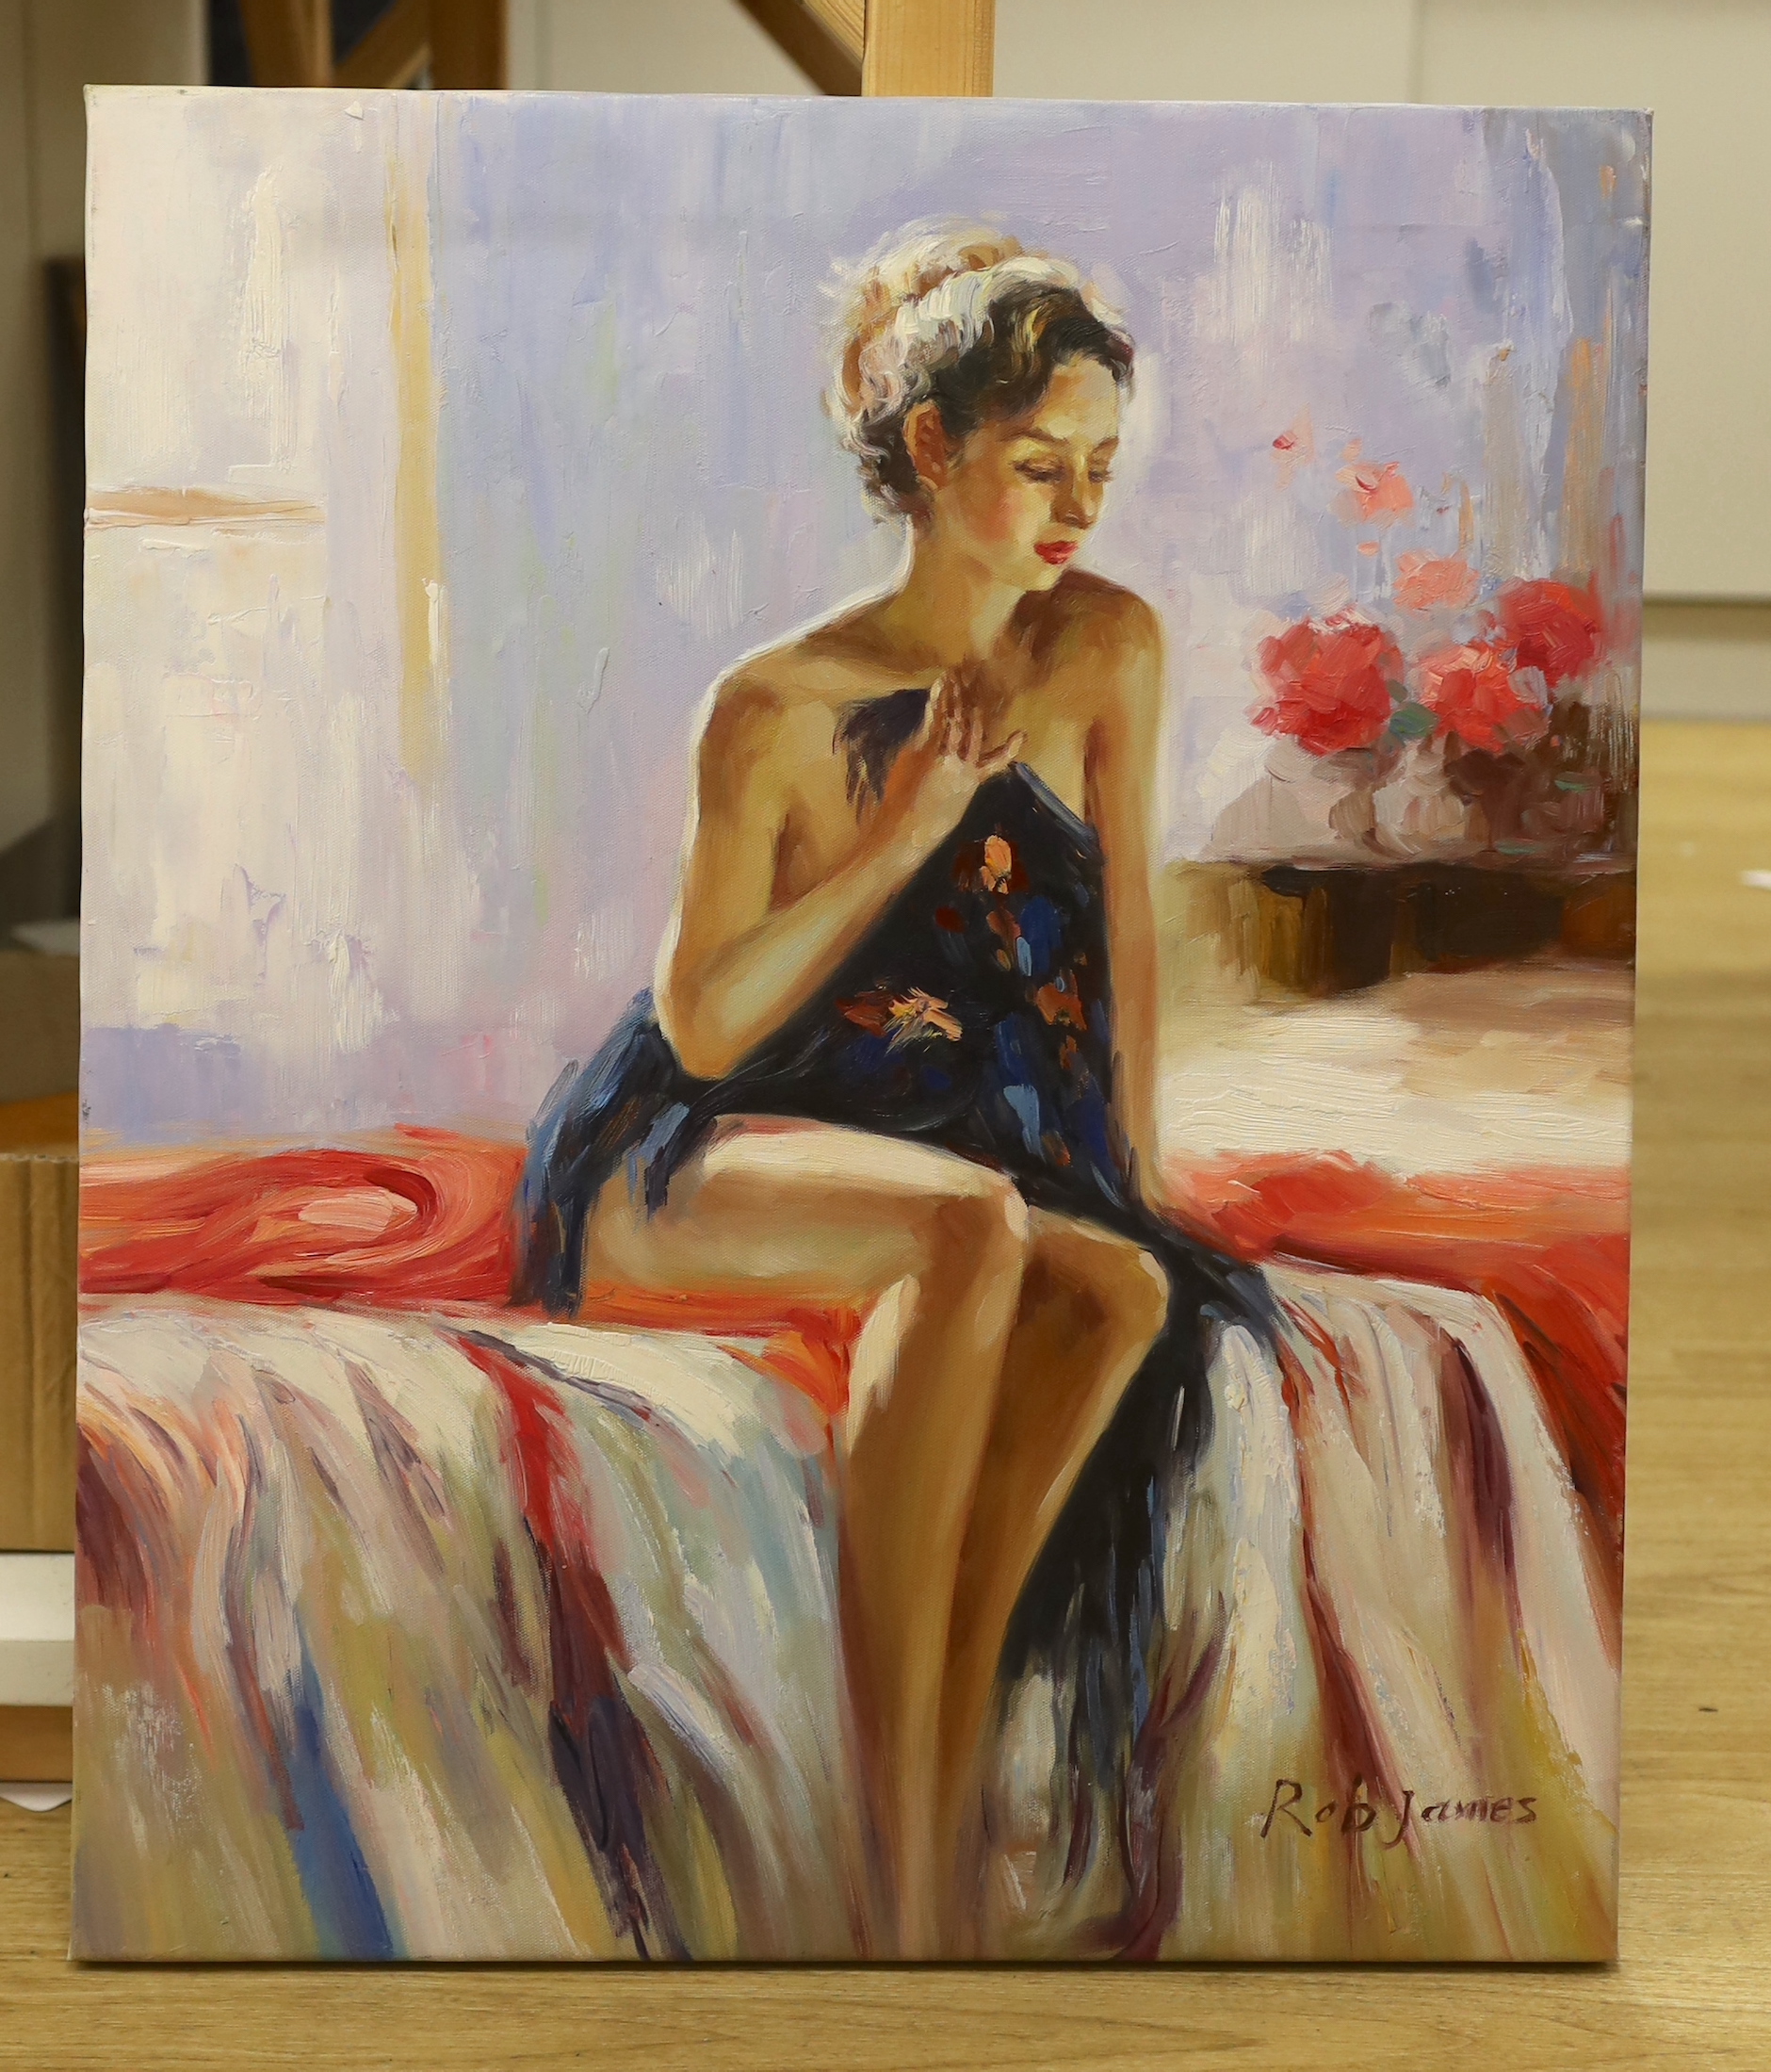 Rob James, acrylic on canvas, Model seated upon a bed, signed, 61 x 51cm, unframed - Image 2 of 4